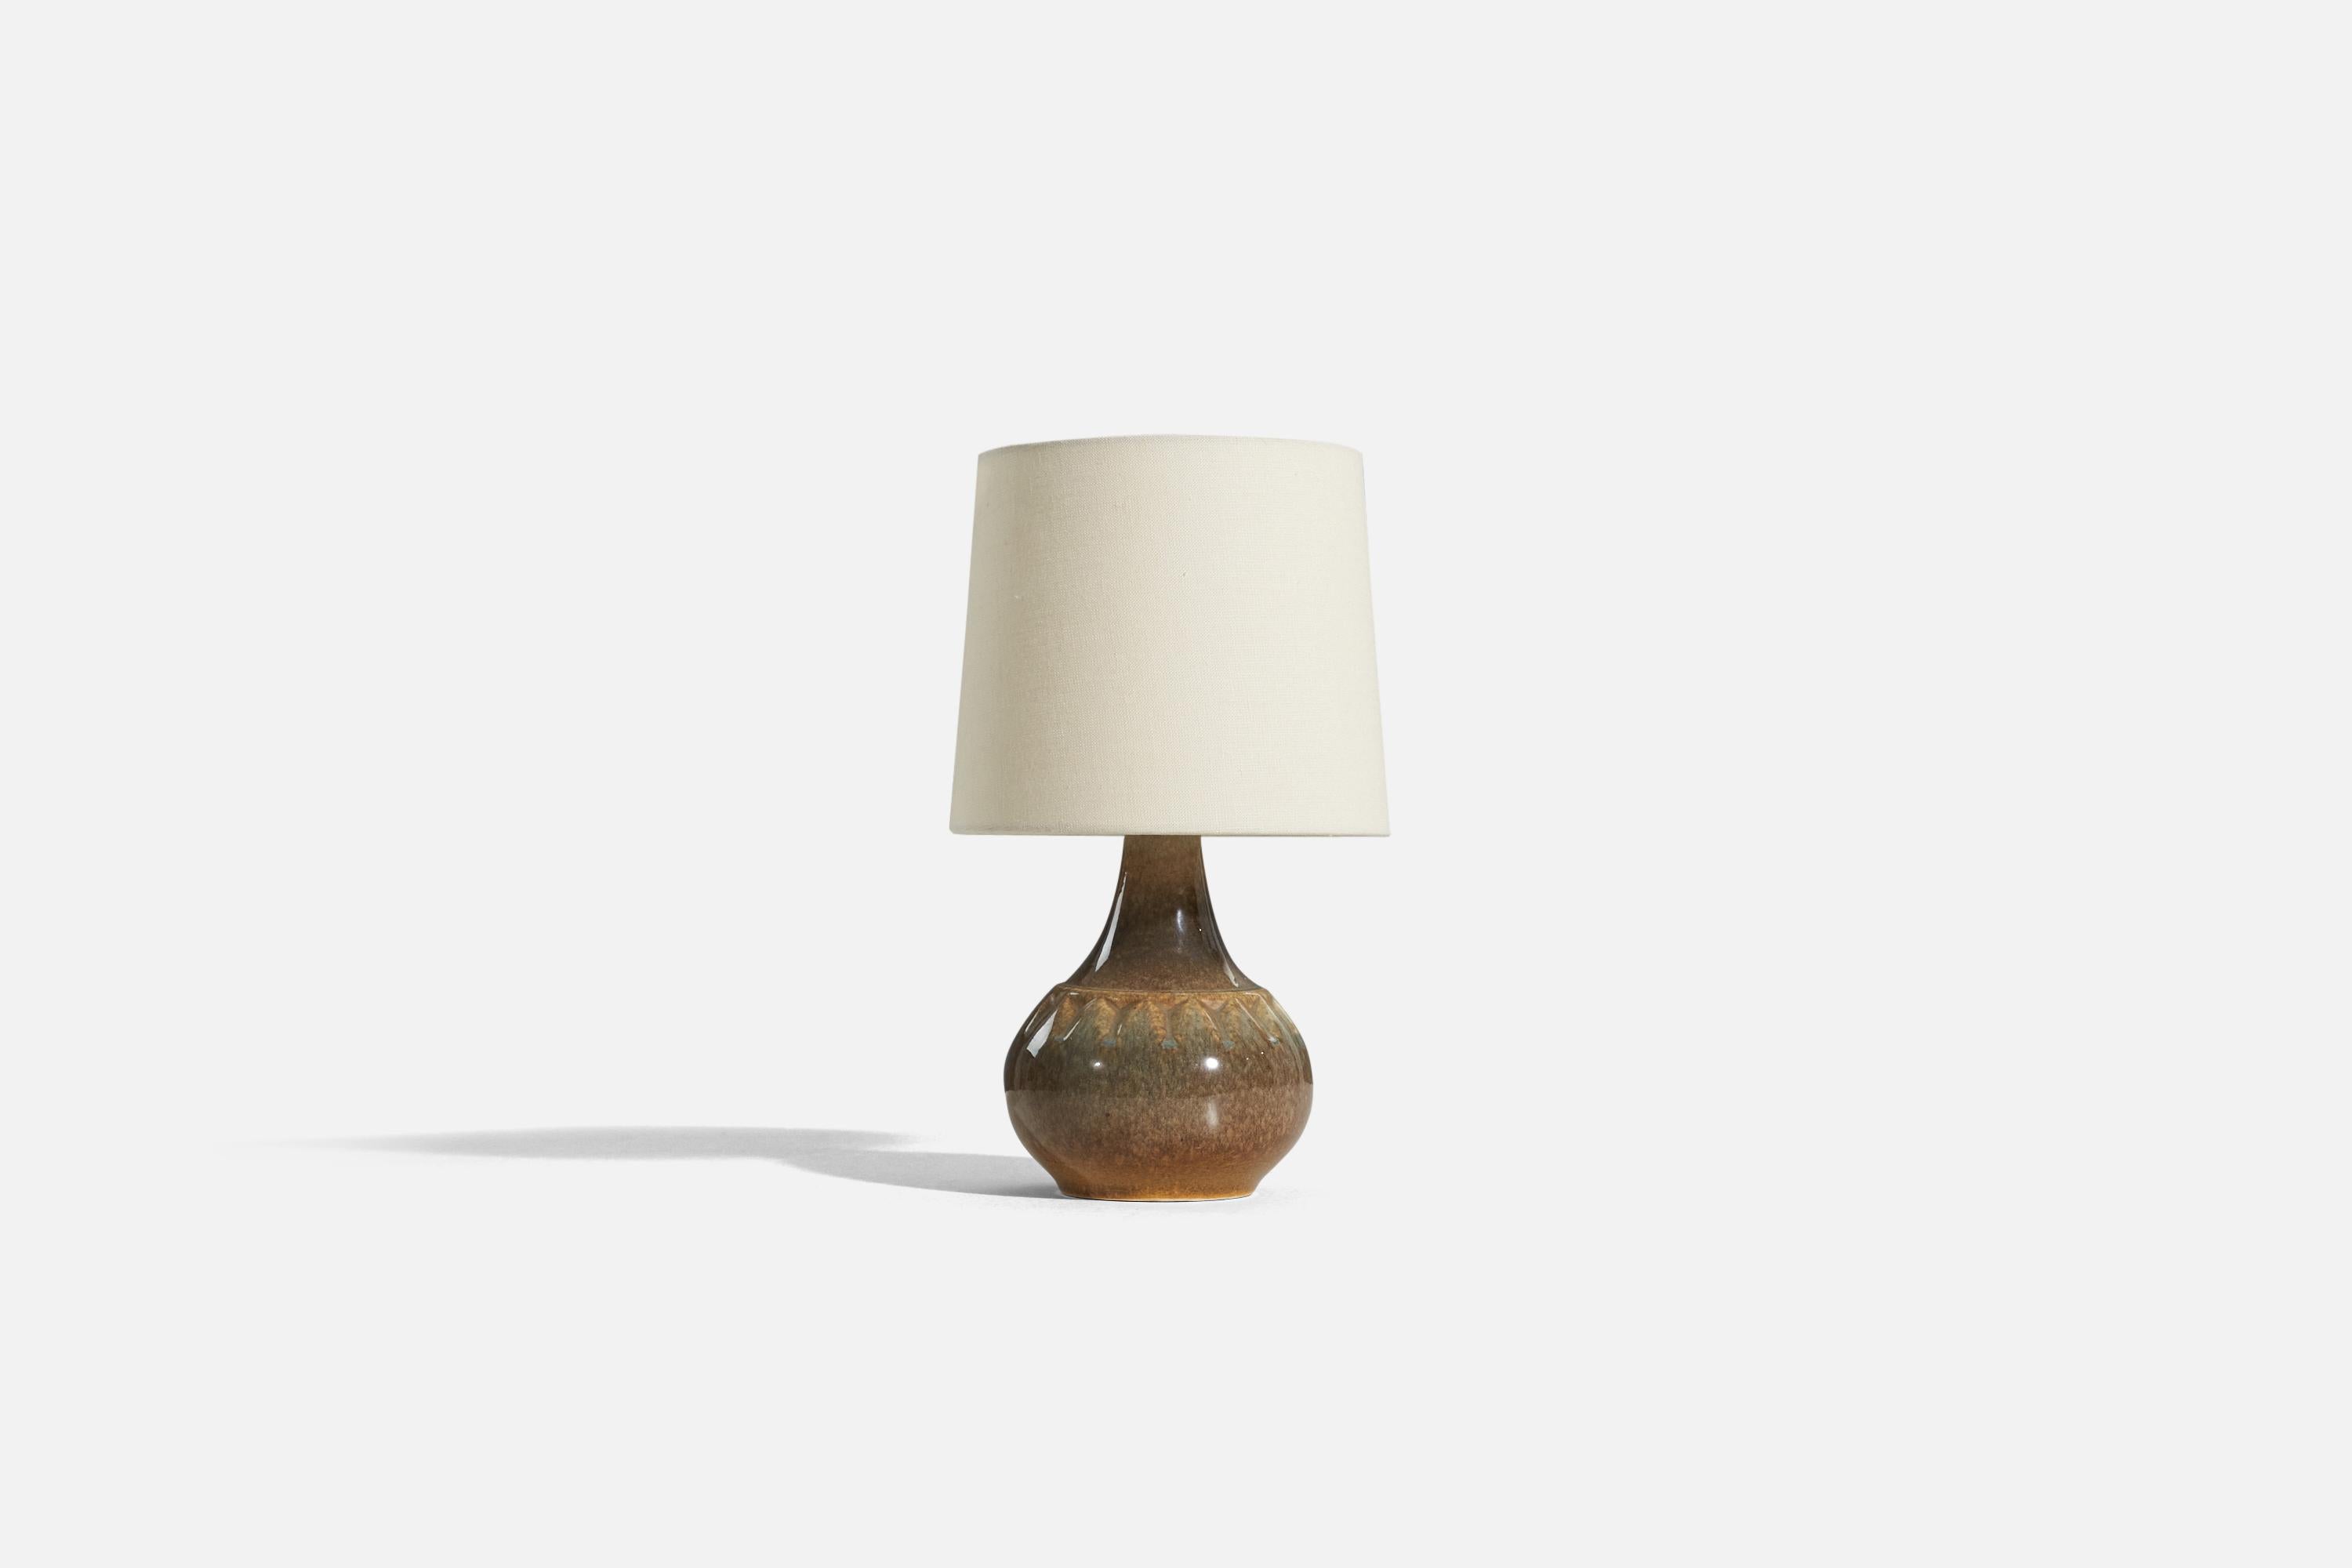 A brown, glazed stoneware table lamp, designed and produced by Søholm Stentøj, Denmark, 1970s.

Sold without lampshade. 
Dimensions of Lamp (inches) : 9.6875 x 5.75 x 5.75 (H x W x D)
Dimensions of Shade (inches) : 7 x 8 x 7 (T x B x